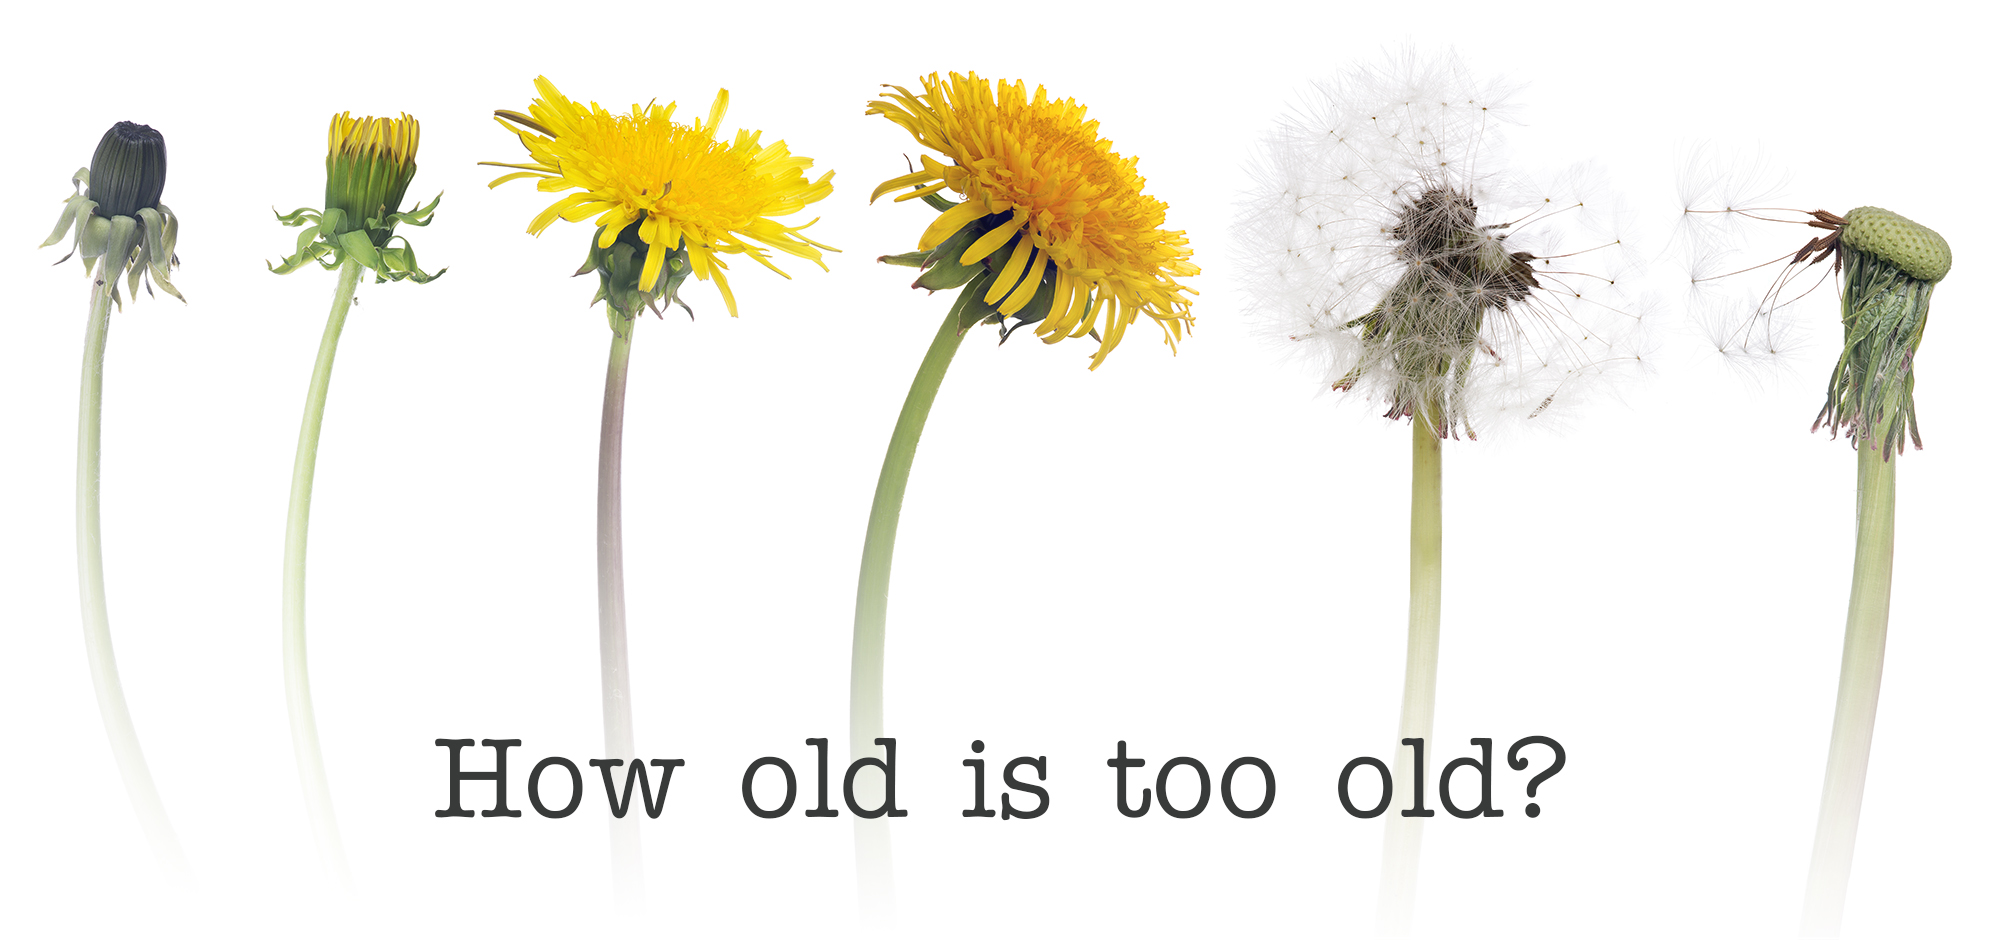 How old is too old?